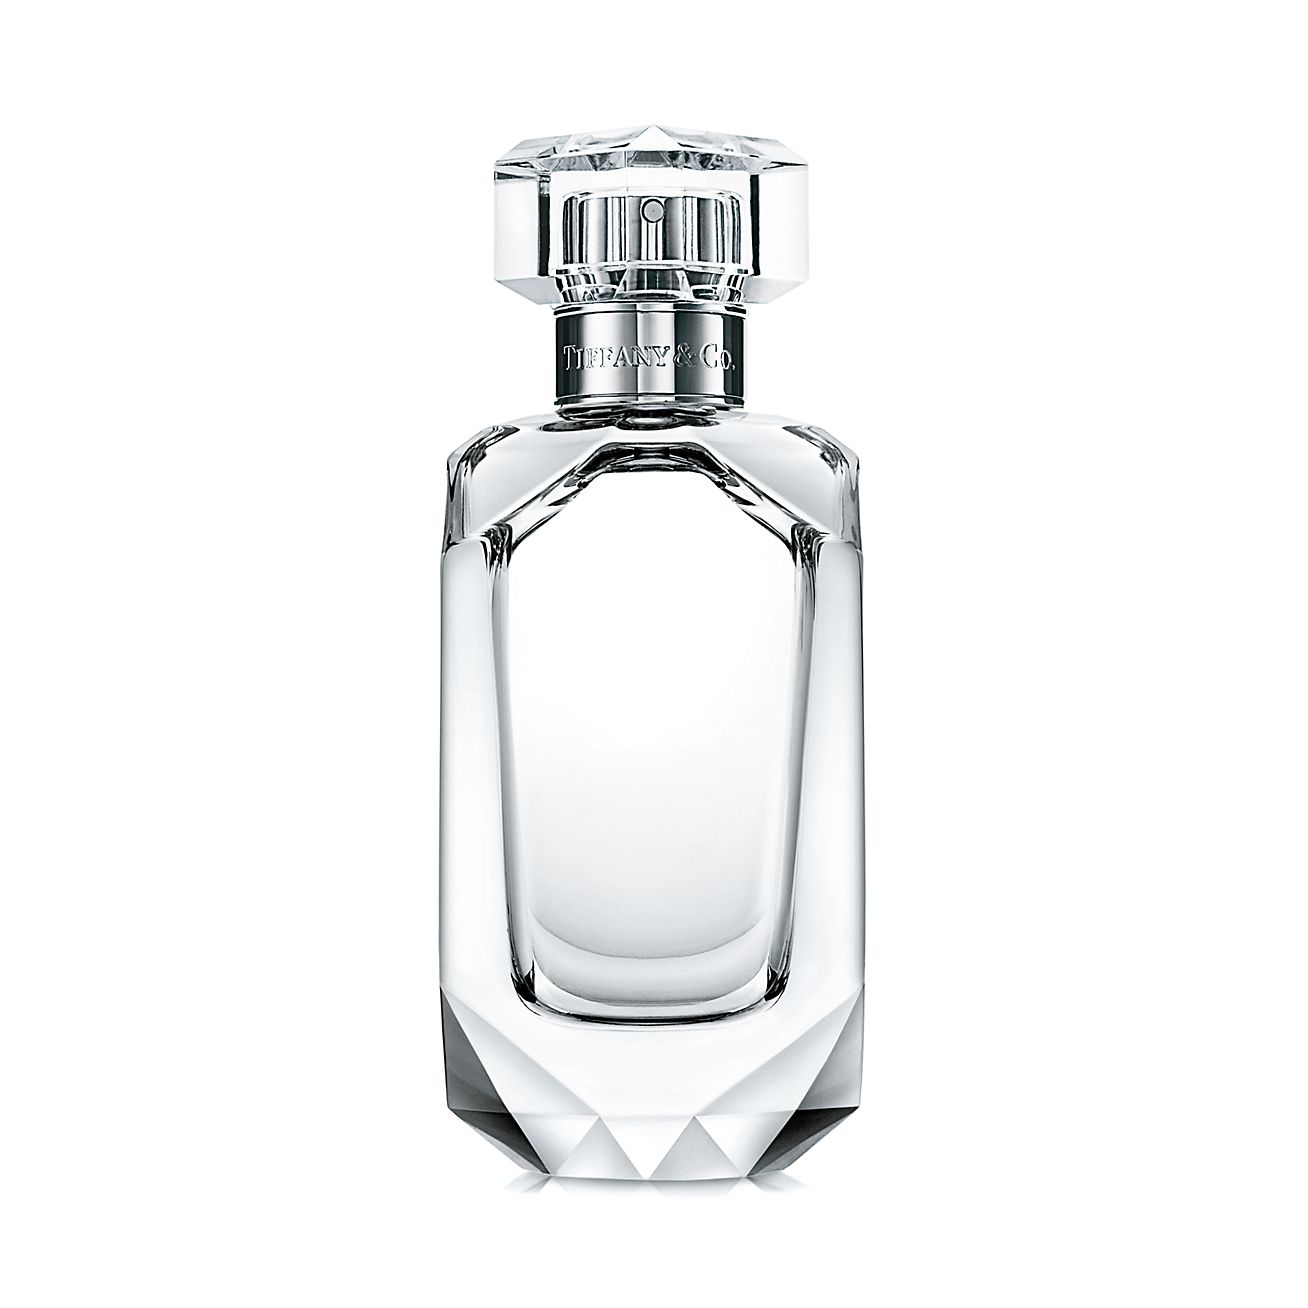 tiffany and co new fragrance